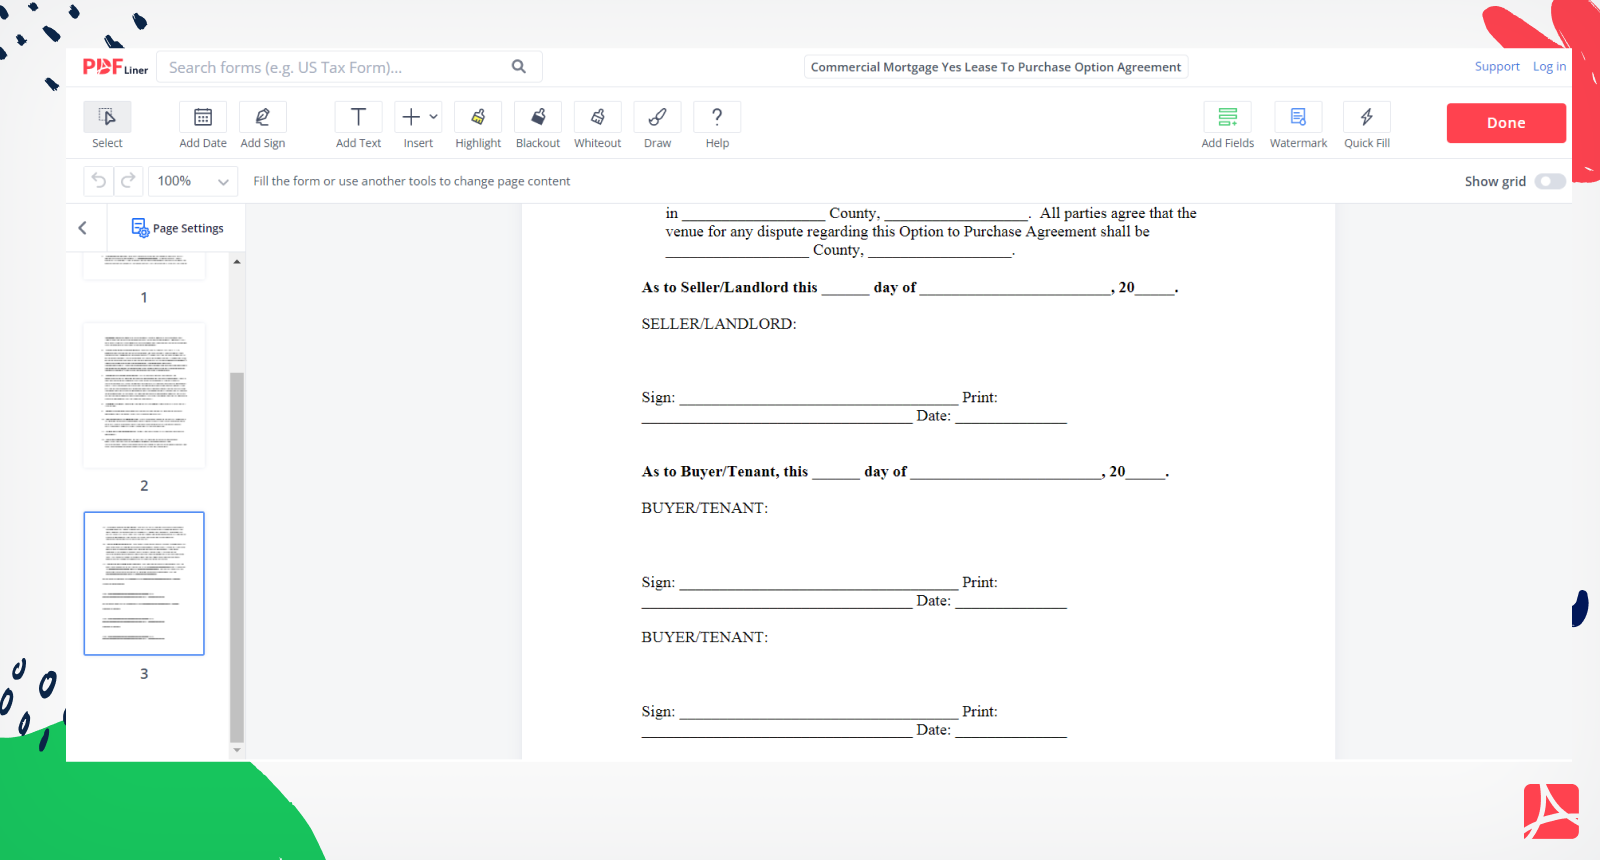 Commercial Mortgage Yes Lease To Purchase Option Agreement Form Screenshot 2